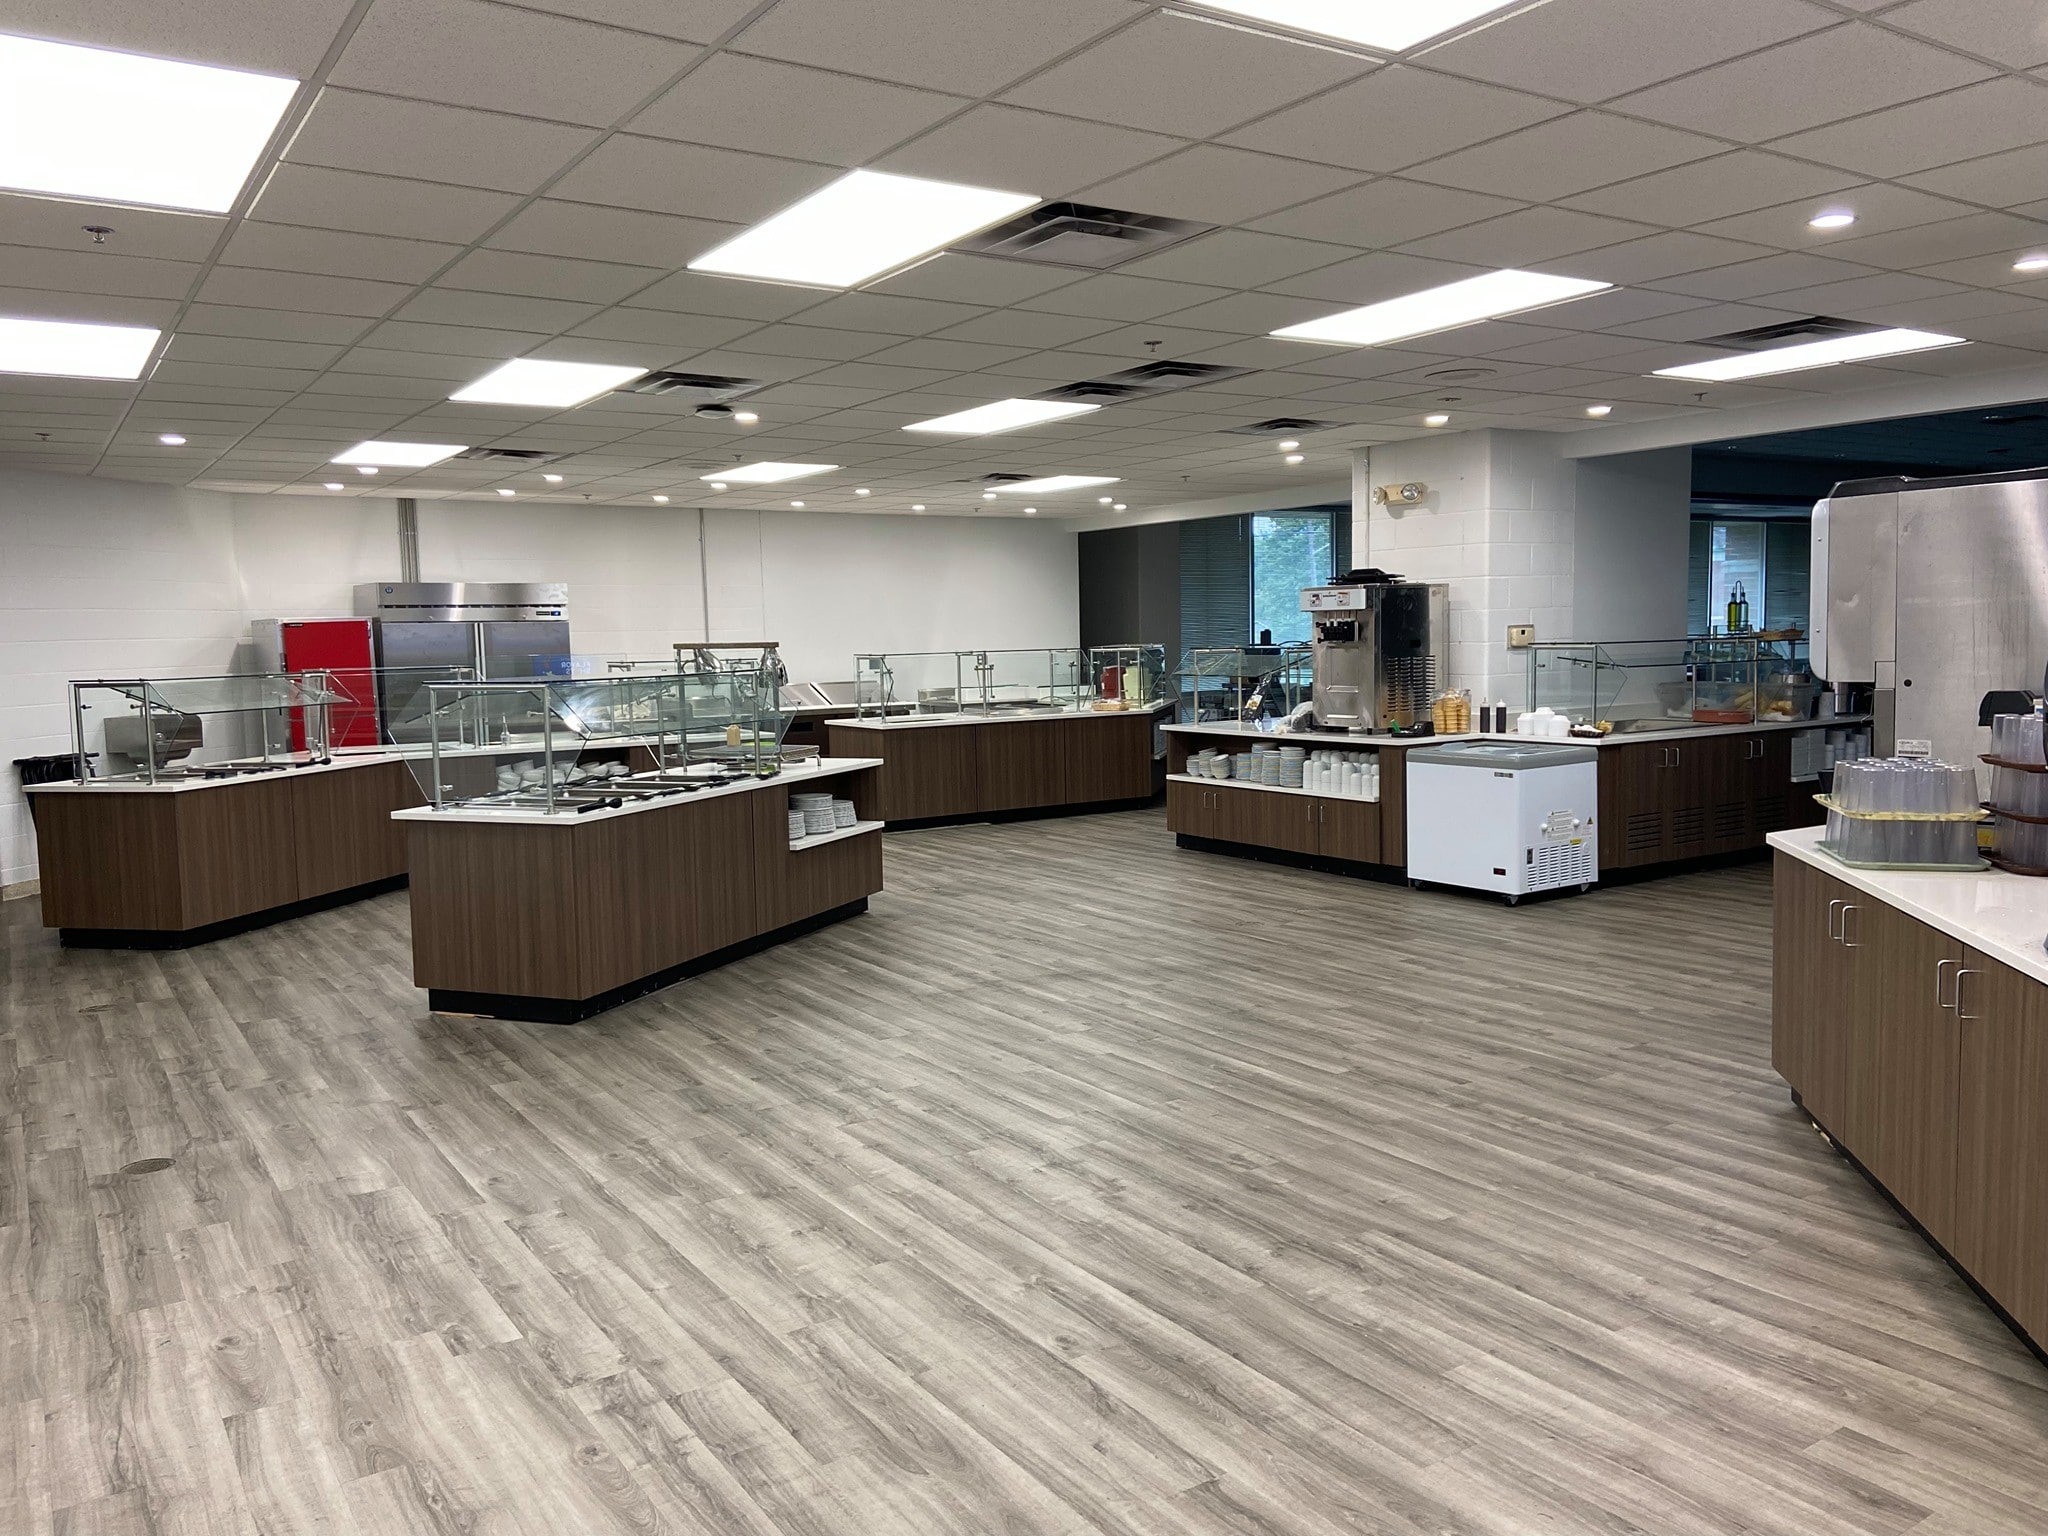 newly renovated cafeteria